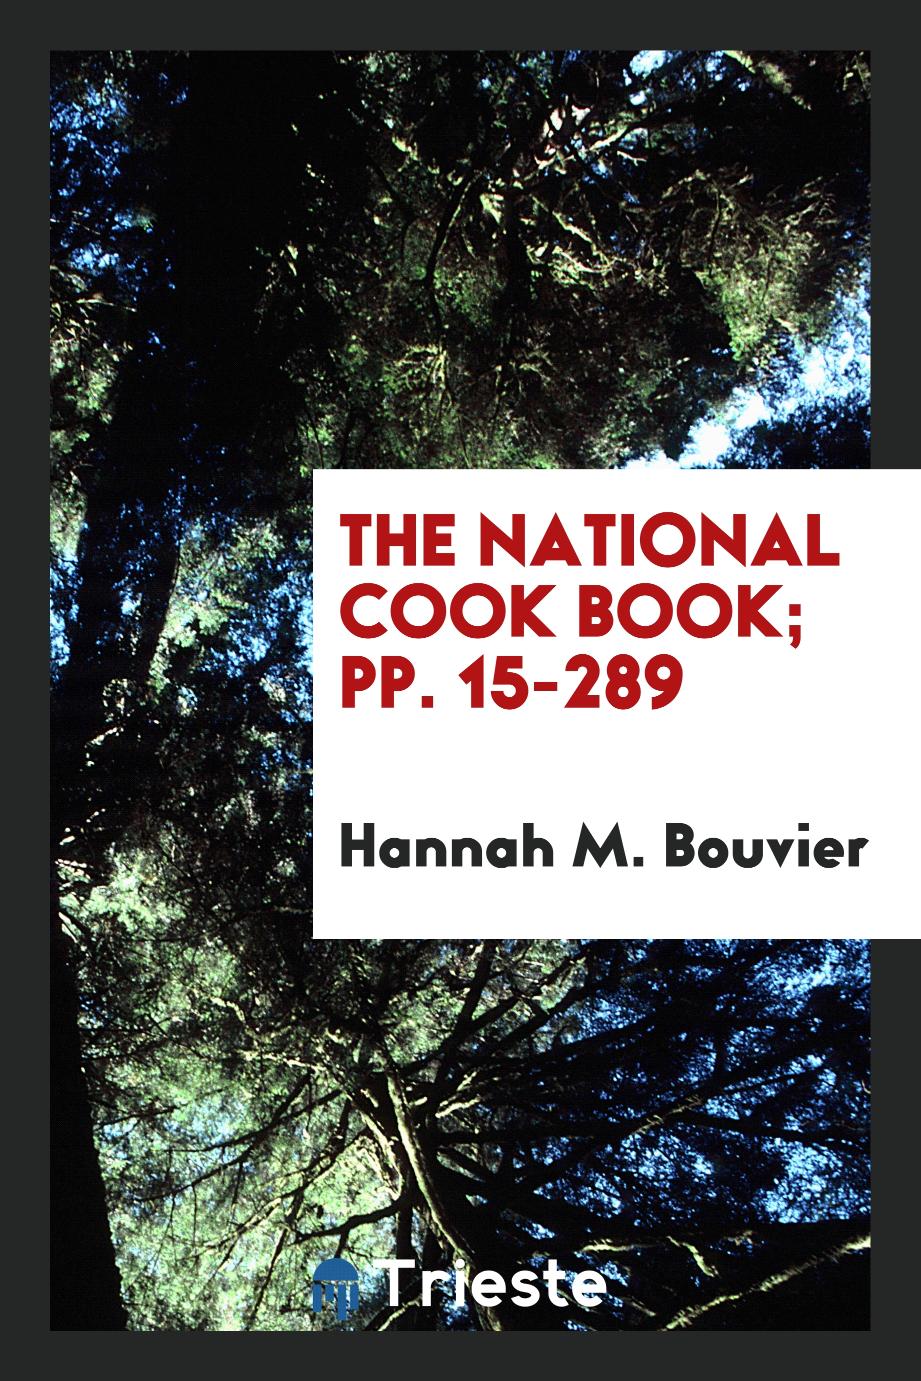 The National Cook Book; pp. 15-289